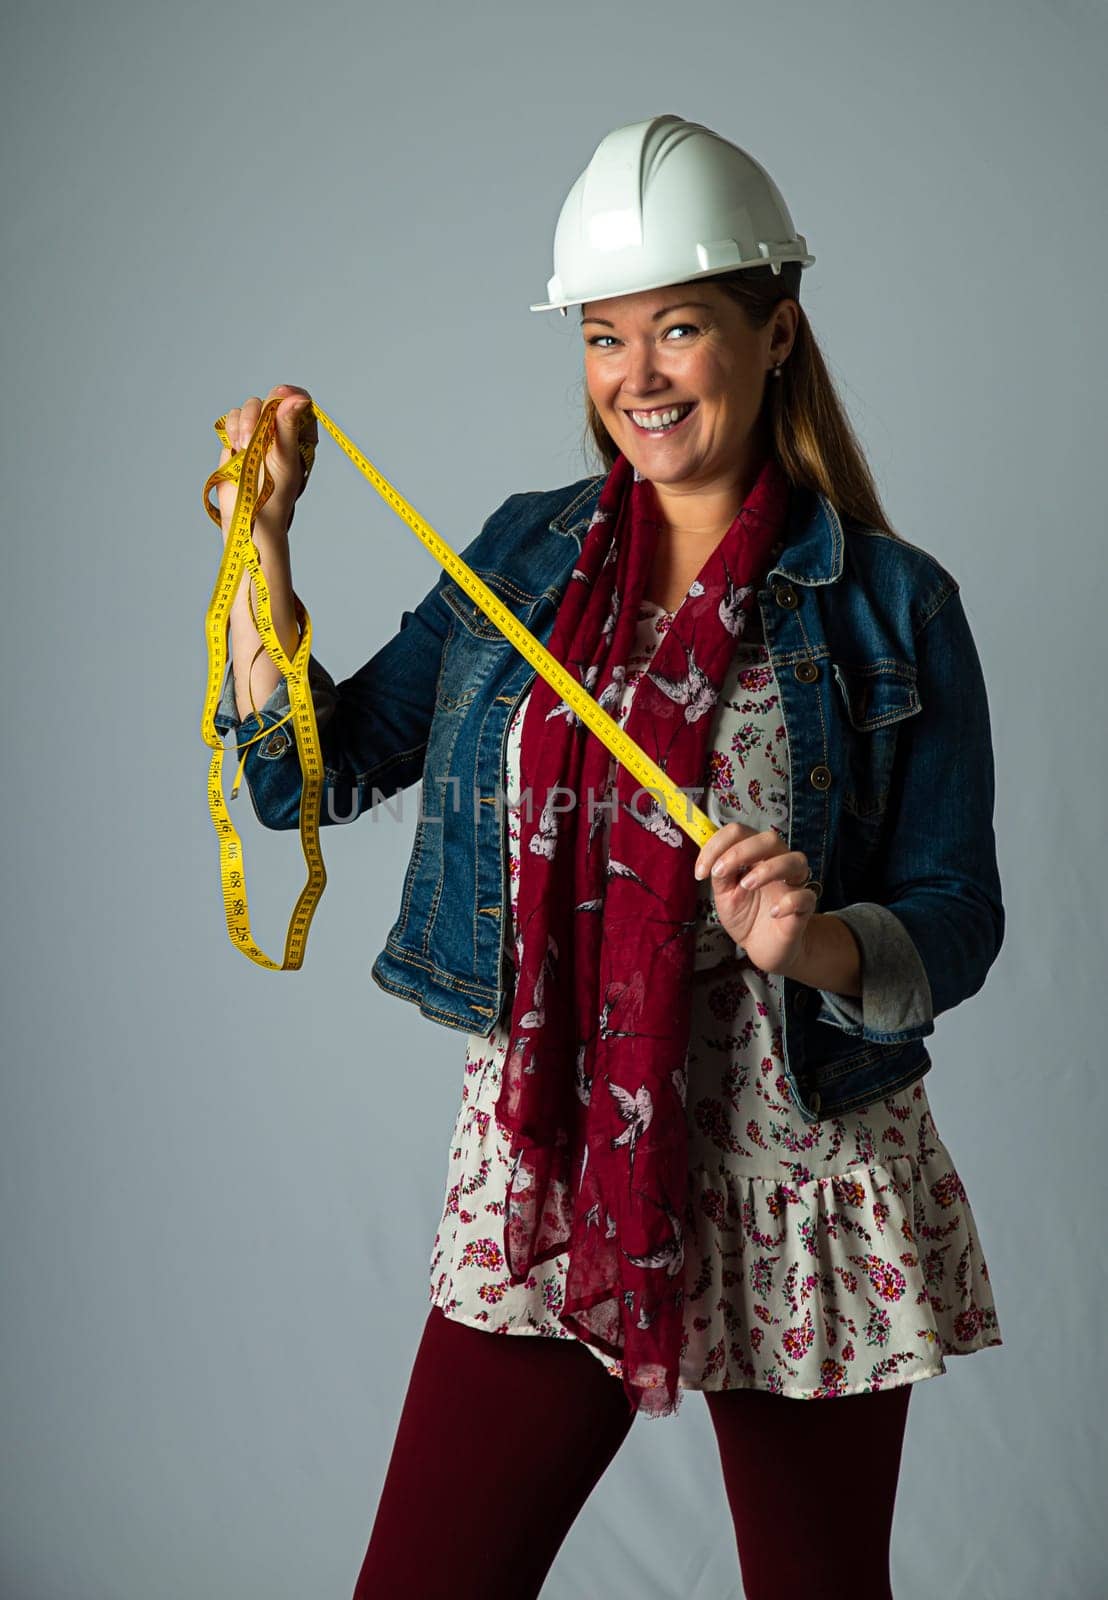 Forty something woman, wearing stylish bohemian clothing and a hard hat, holding a measuring yellow tape